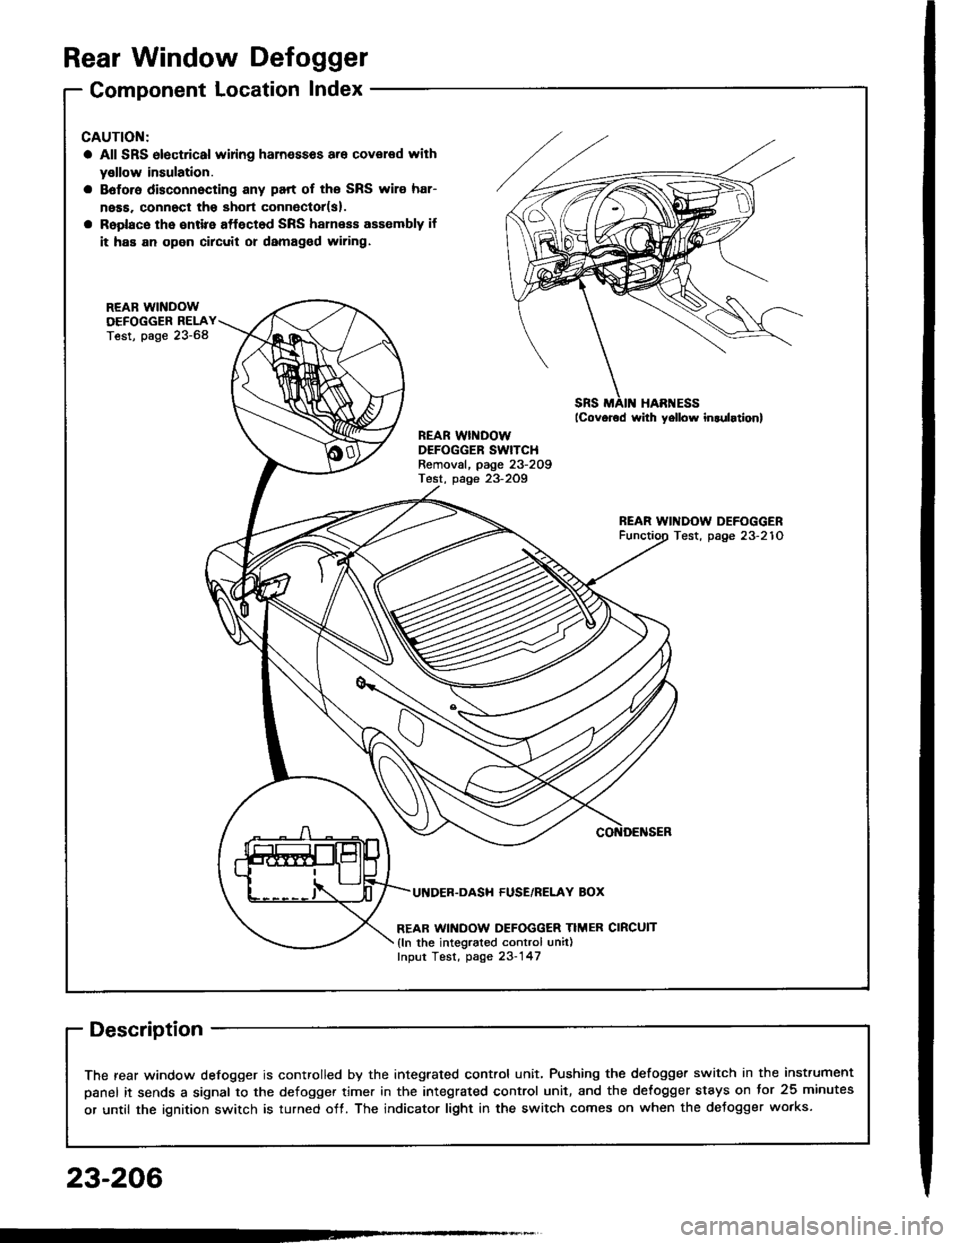 ACURA INTEGRA 1994  Service Repair Manual Rear Window Defogger
Component Location Index
CAUTION:
a All SRS olectrical wi ng ham€$6s are covoled with
y€llow insulation.
B6foro disconnocting any part of ths SRS wire har-
ness. connoct tho s